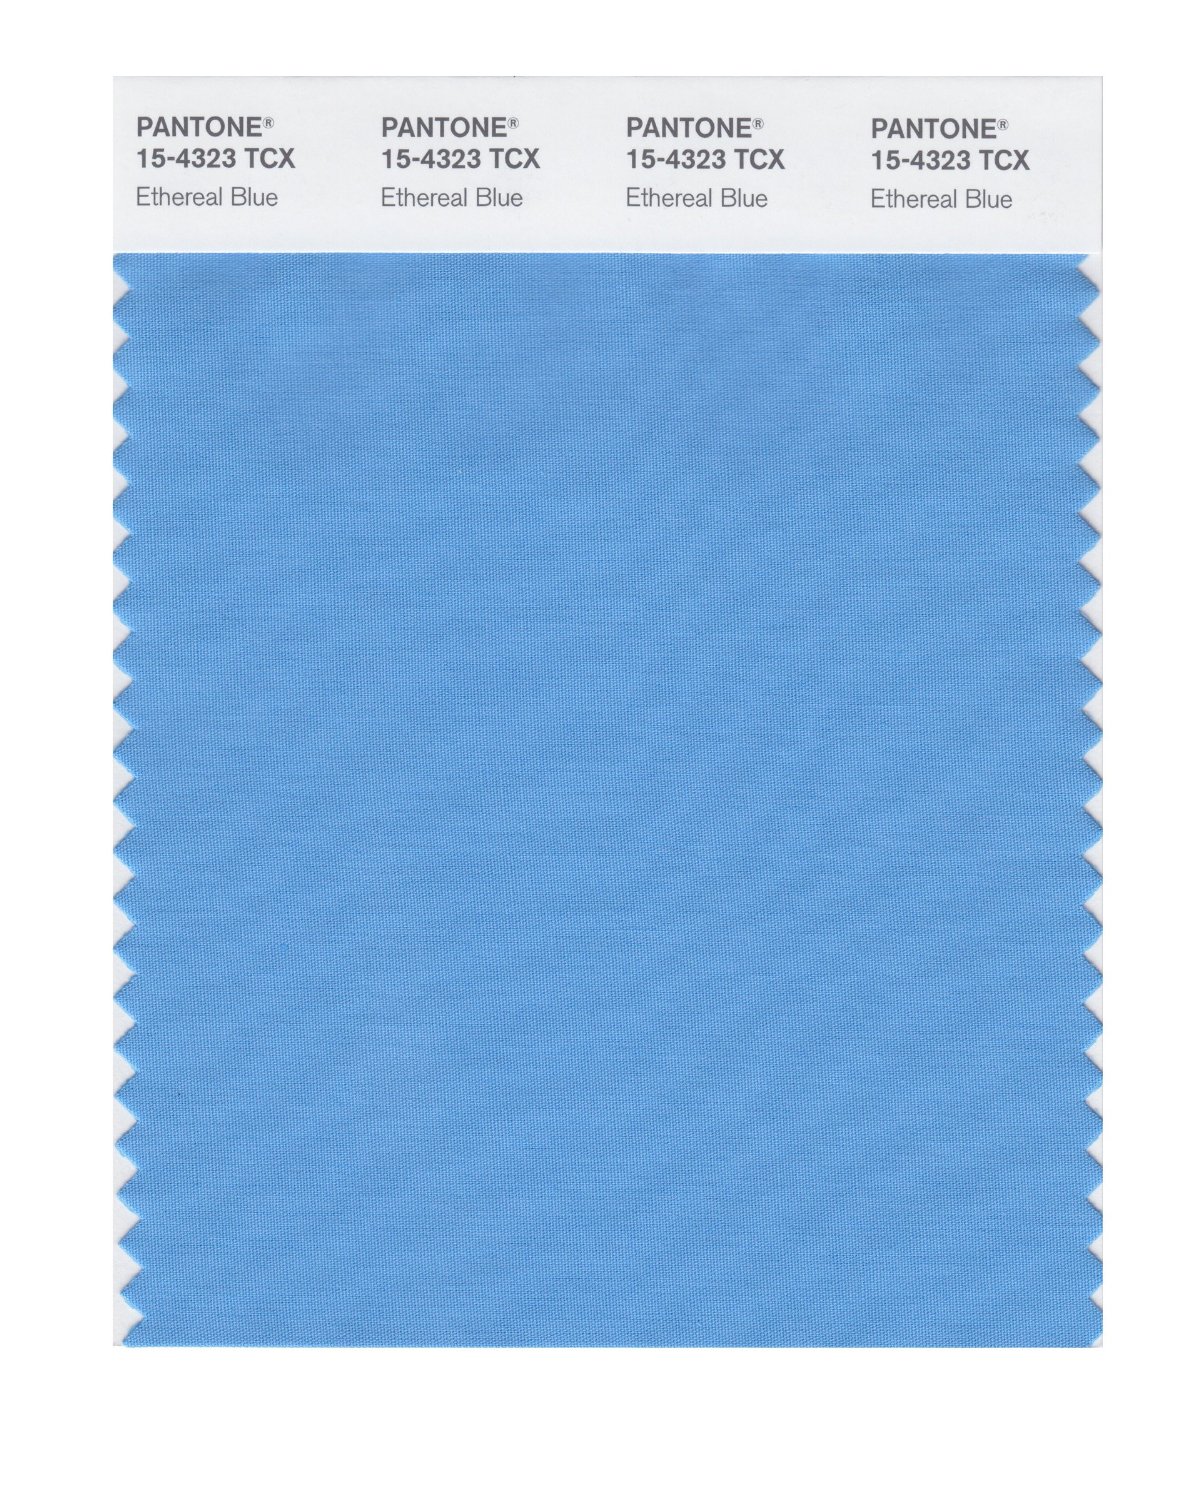 Pantone Cotton Swatch 15-4323 Ethereal Blue